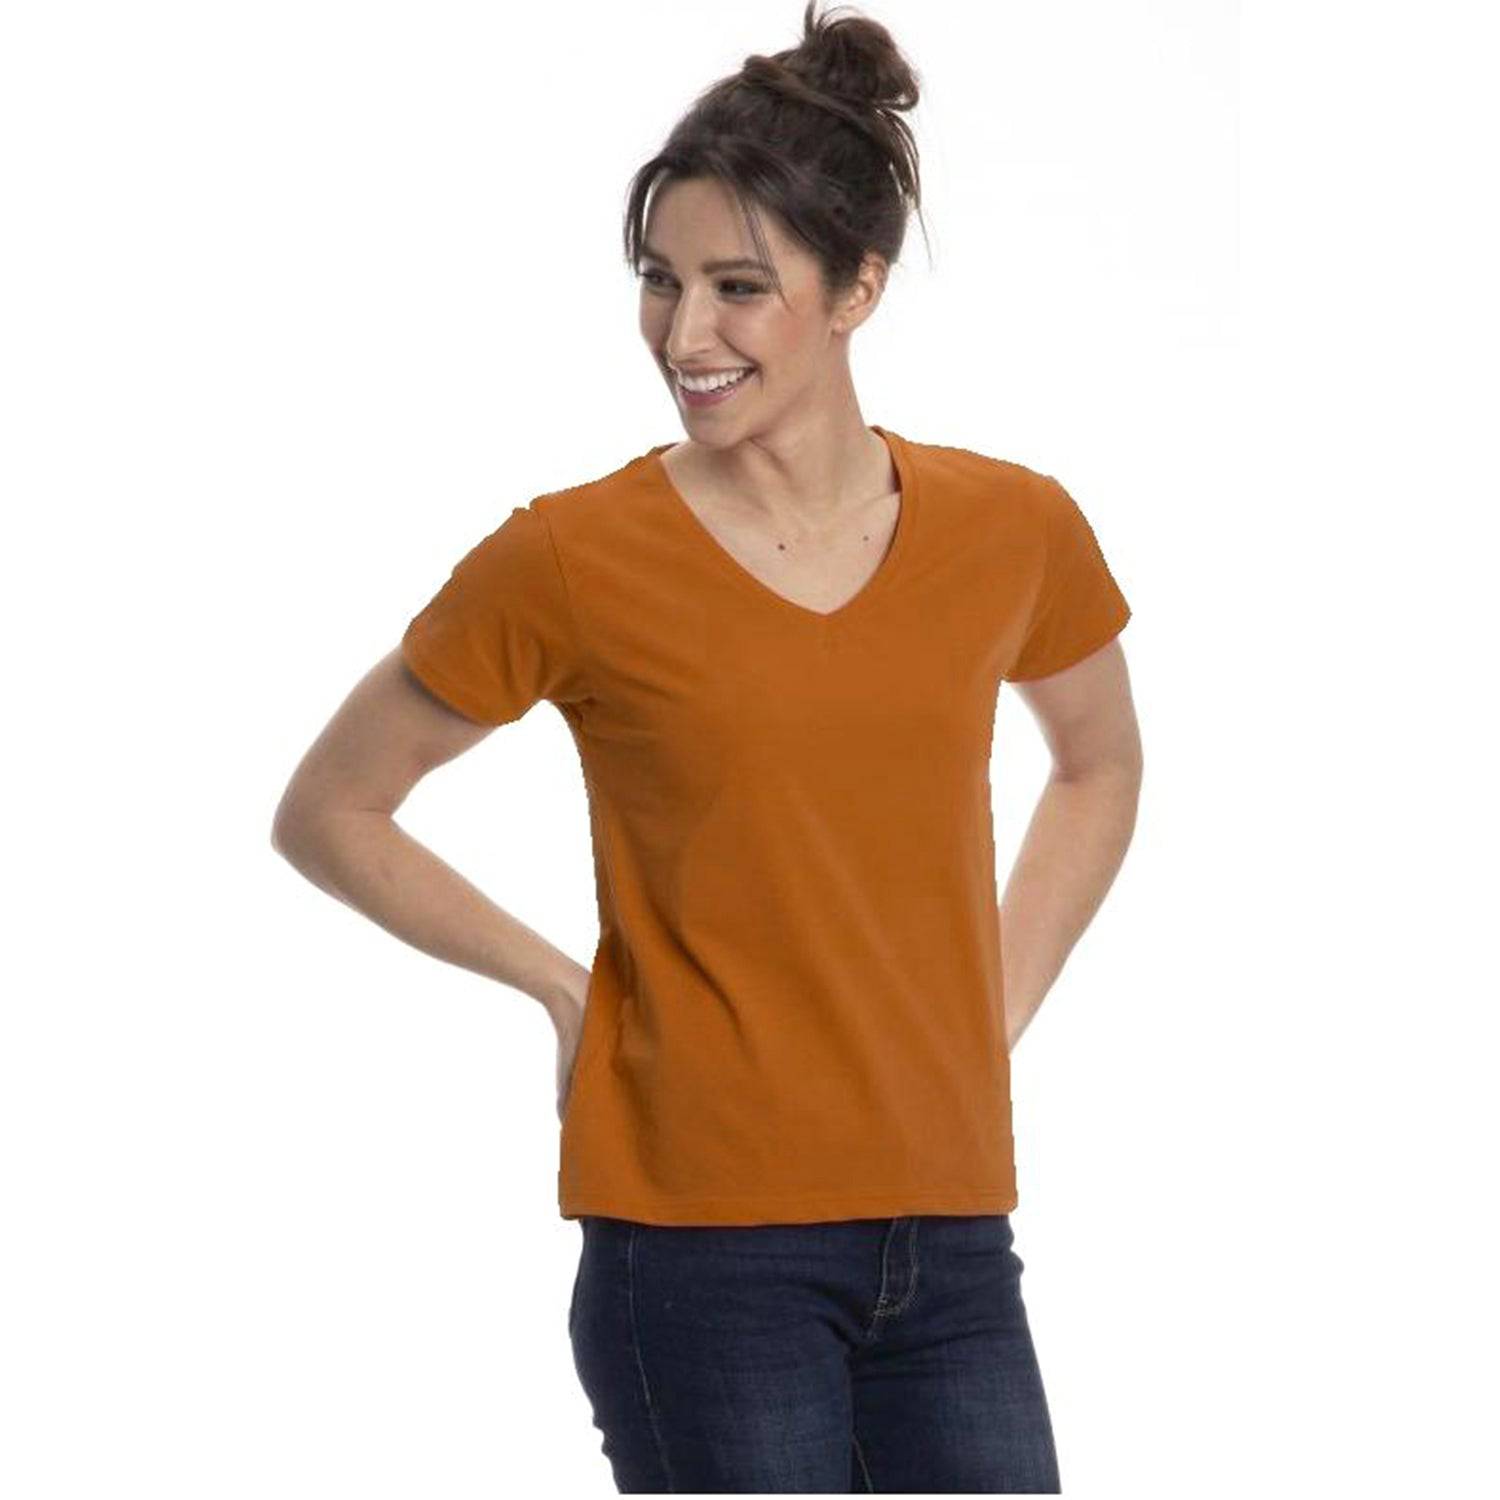 Beluring Women's Summer Shirts Short Sleeve Tops Solid Color Tees (S,Black)  at  Women's Clothing store